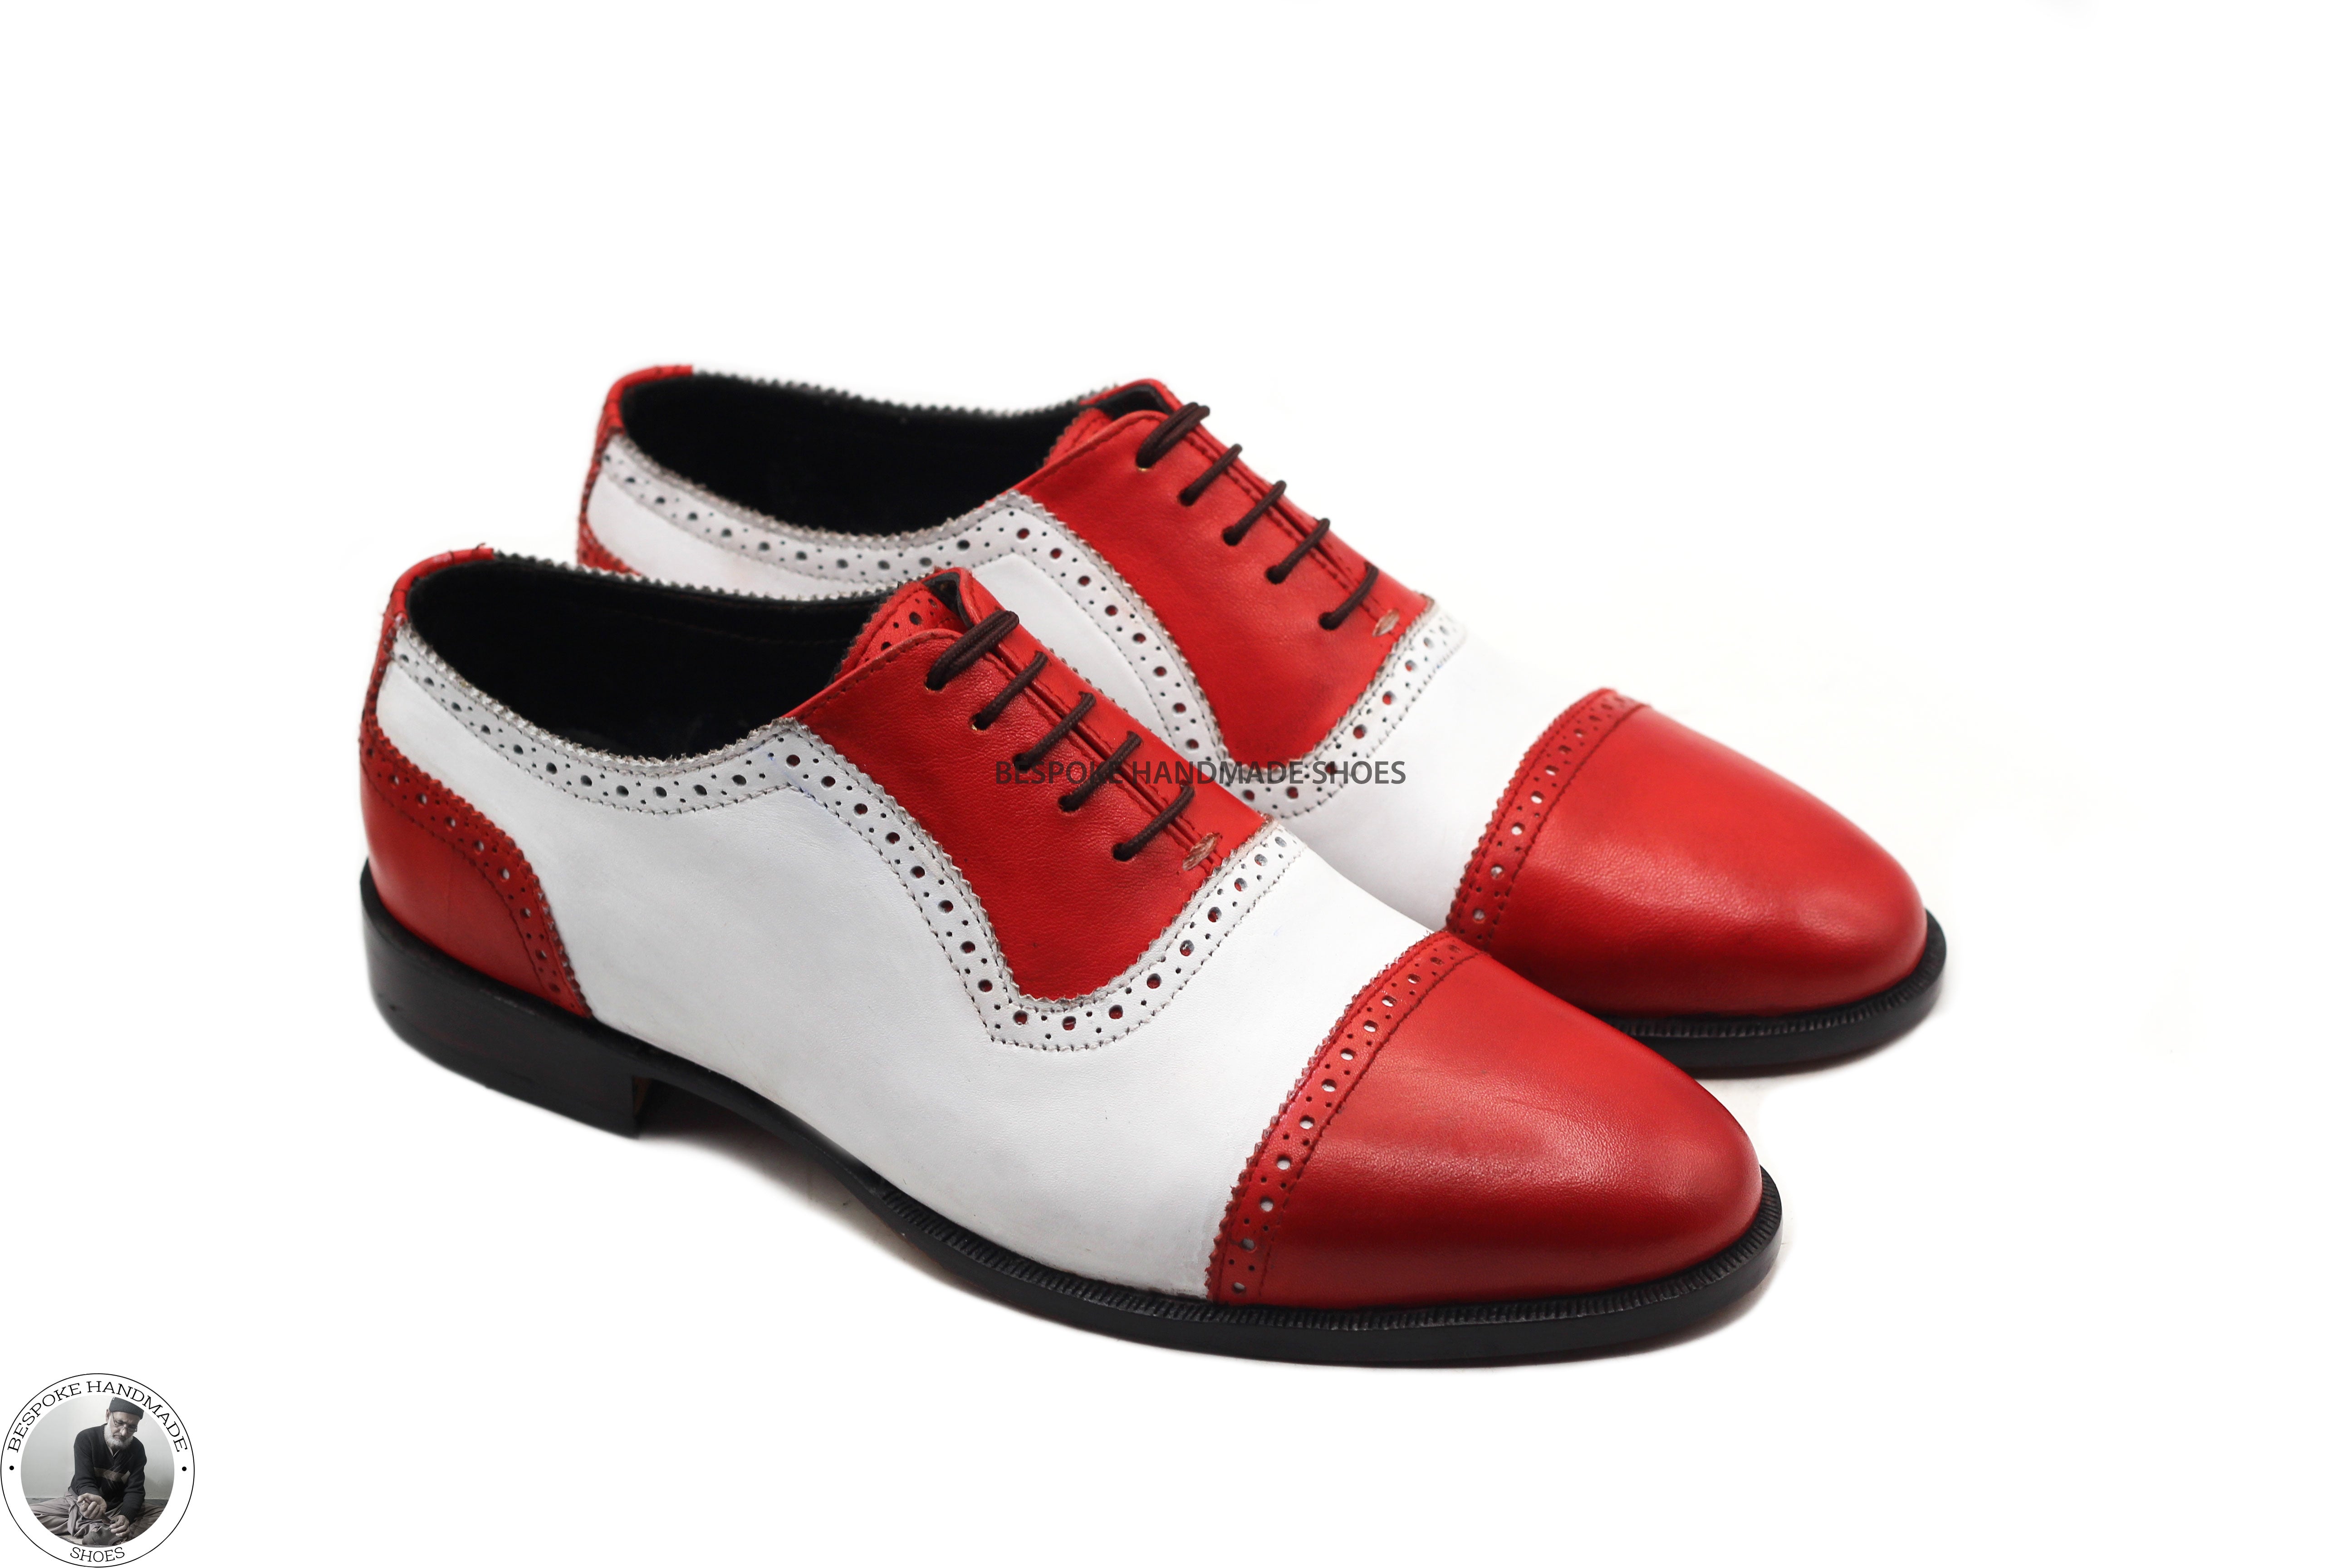 New Men's Handmade White & Red Color Leather Toe Cap Oxford Lace Up Designer Shoes For Men's